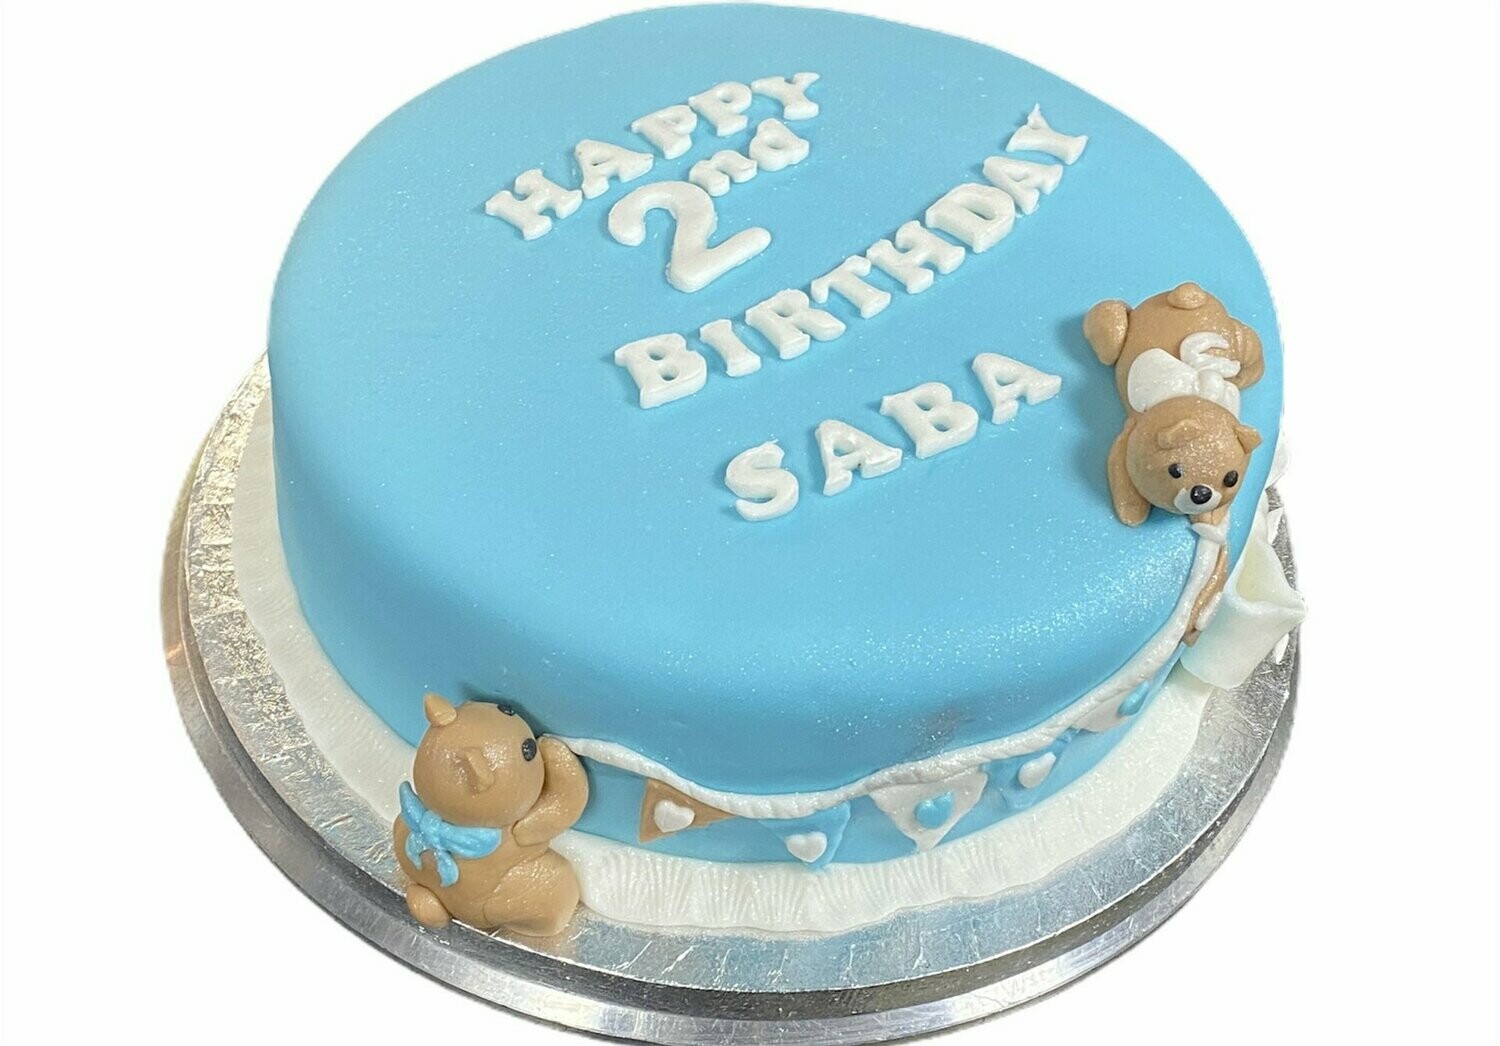 Birthday Cakes Delivery | Ship Nationwide | Goldbelly